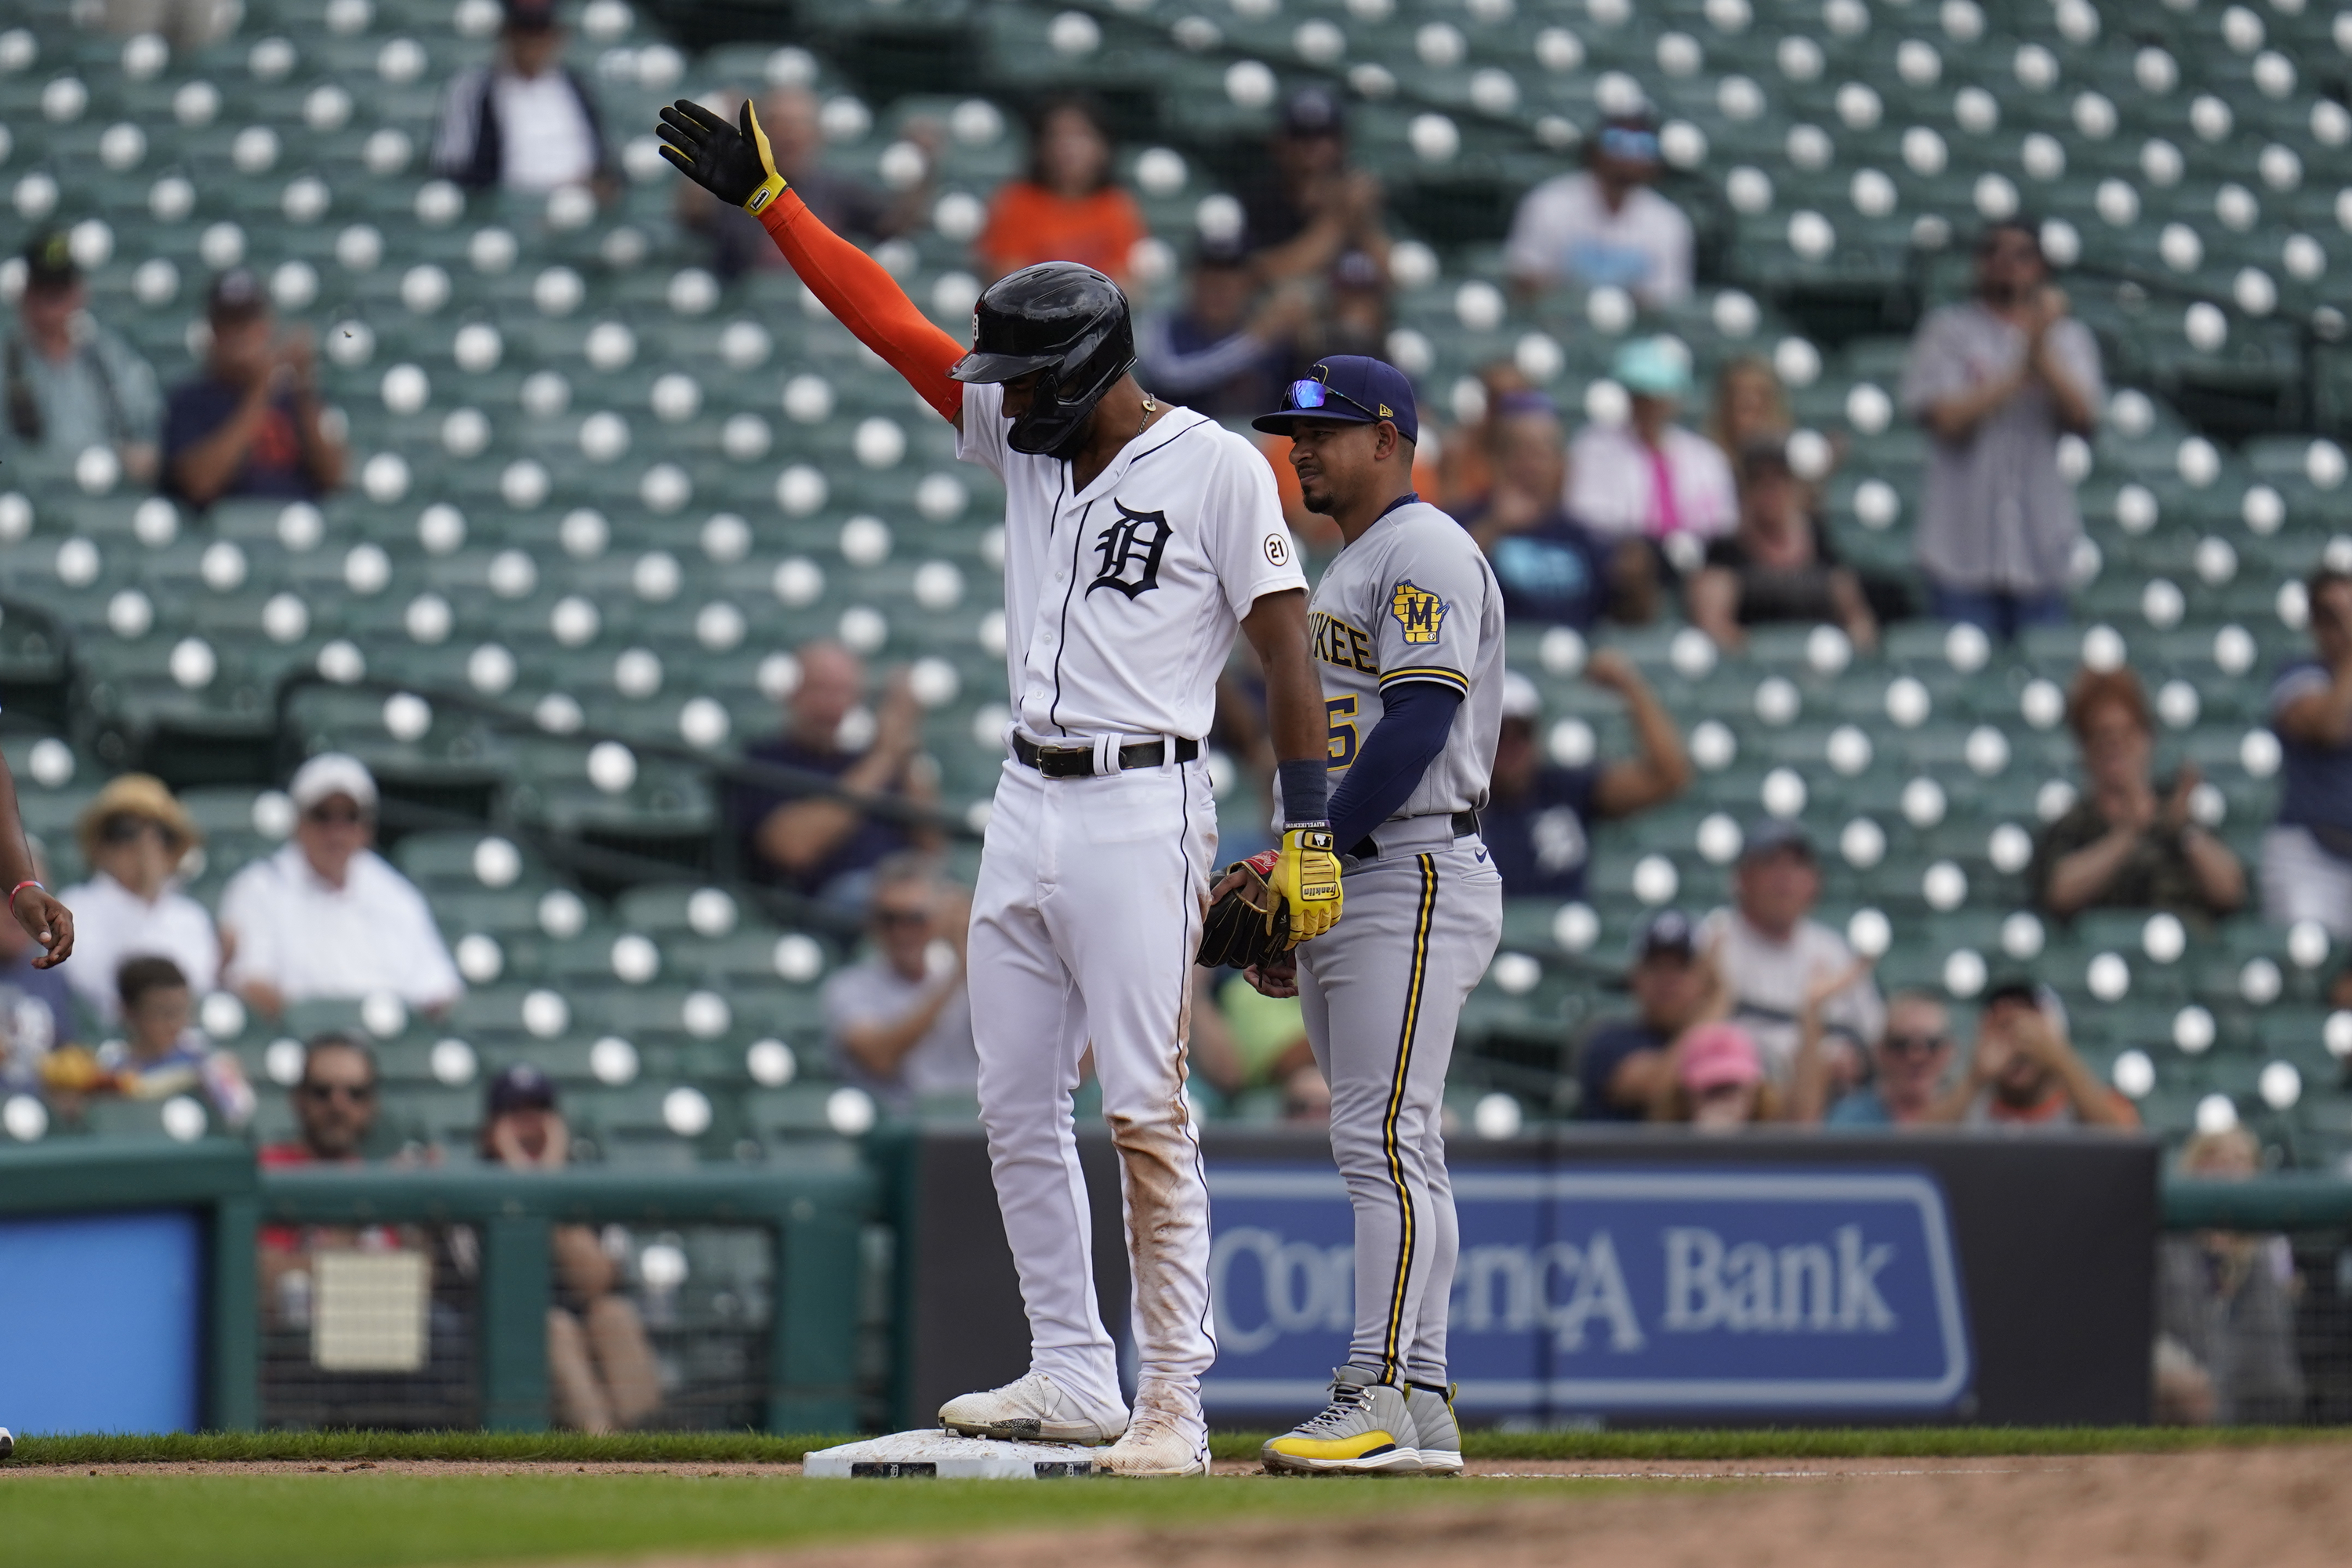 Tigers roster projection 2.0: Now with more players, new decisions